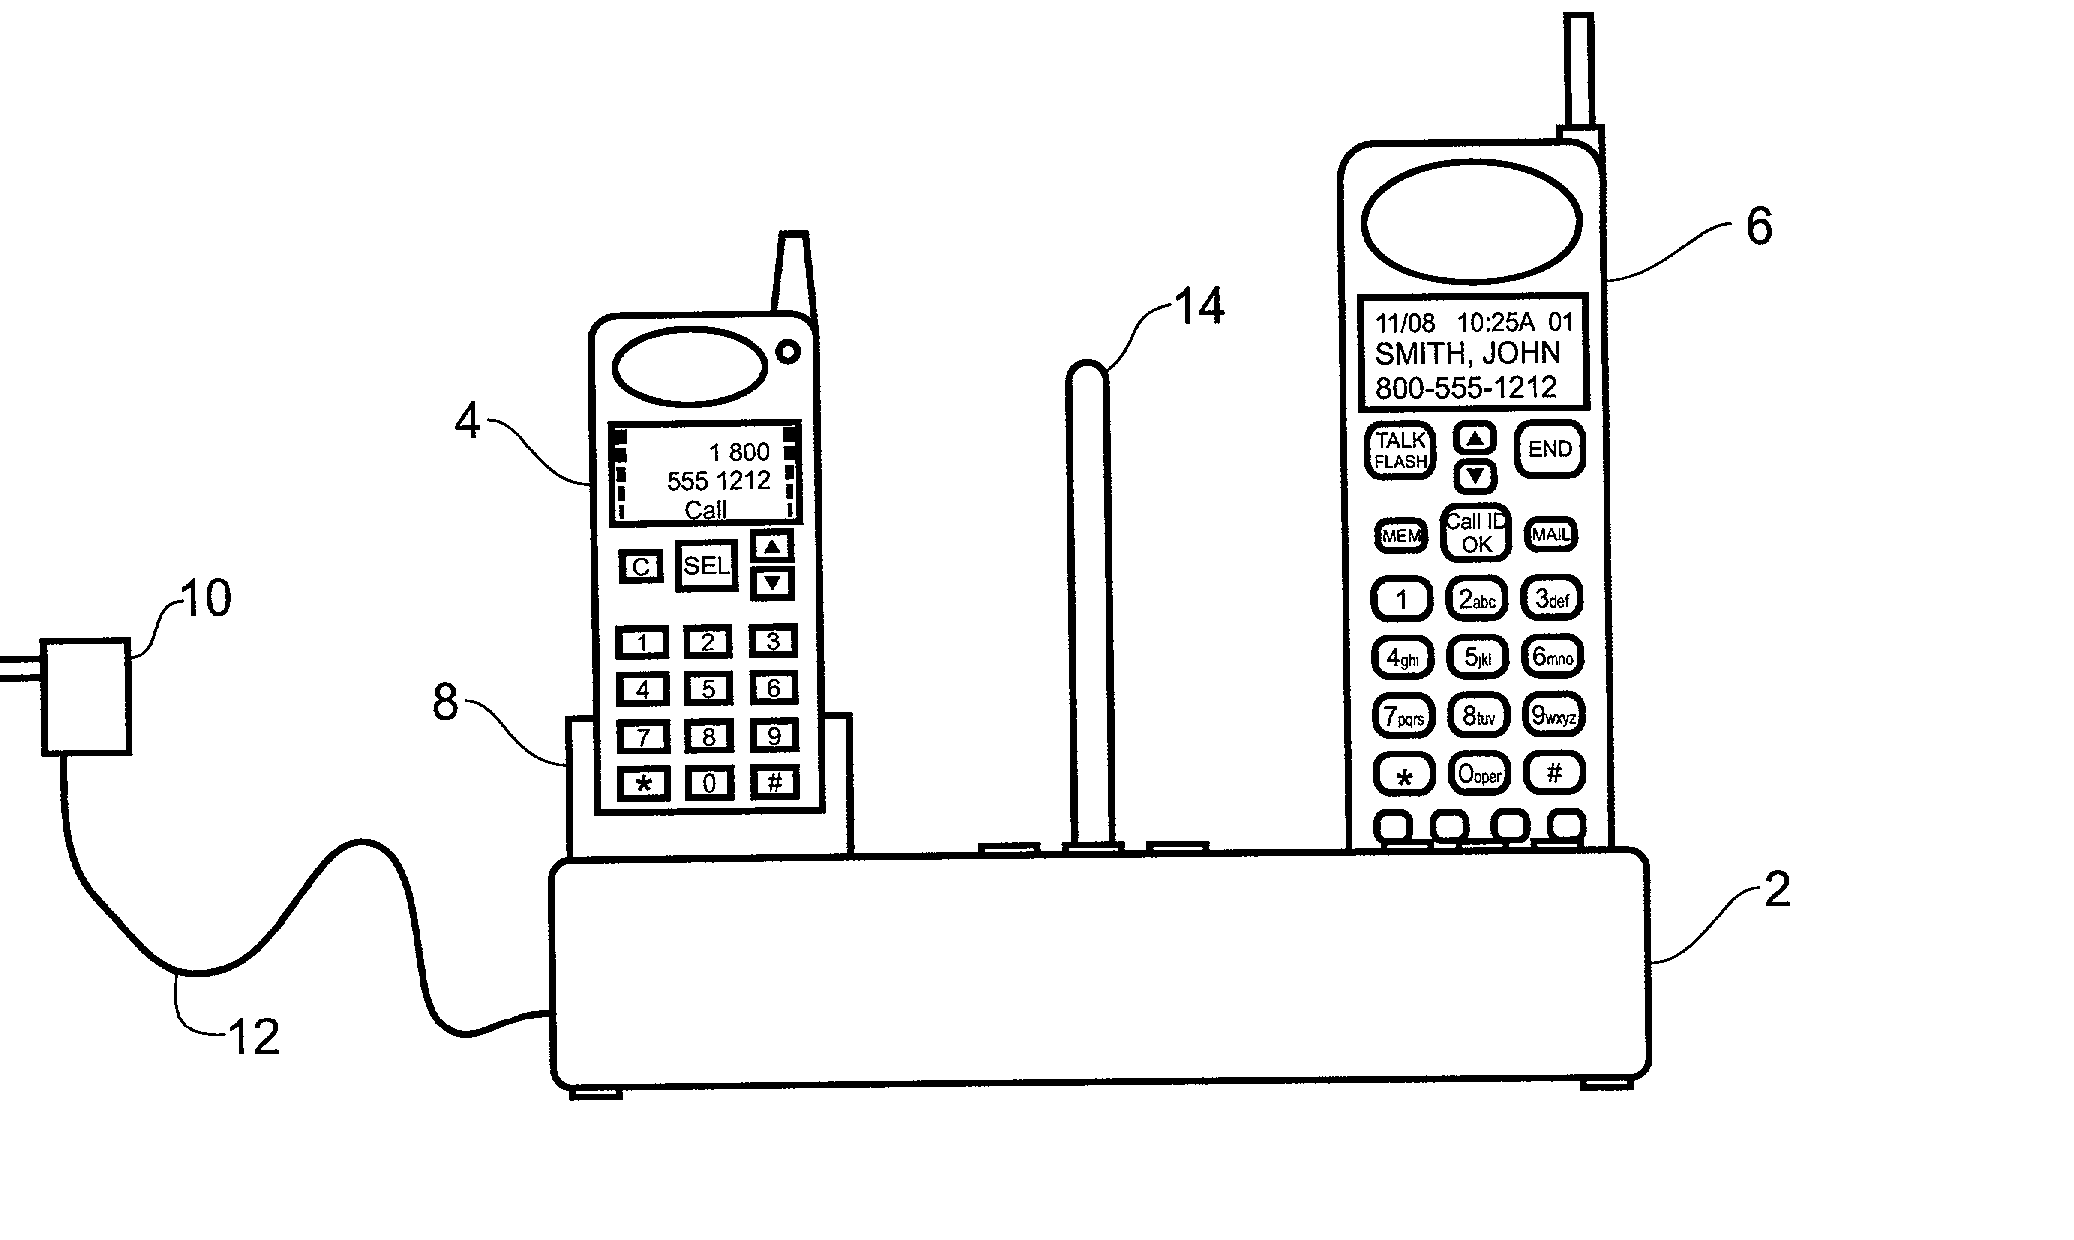 Cordless and wireless telephone docking station